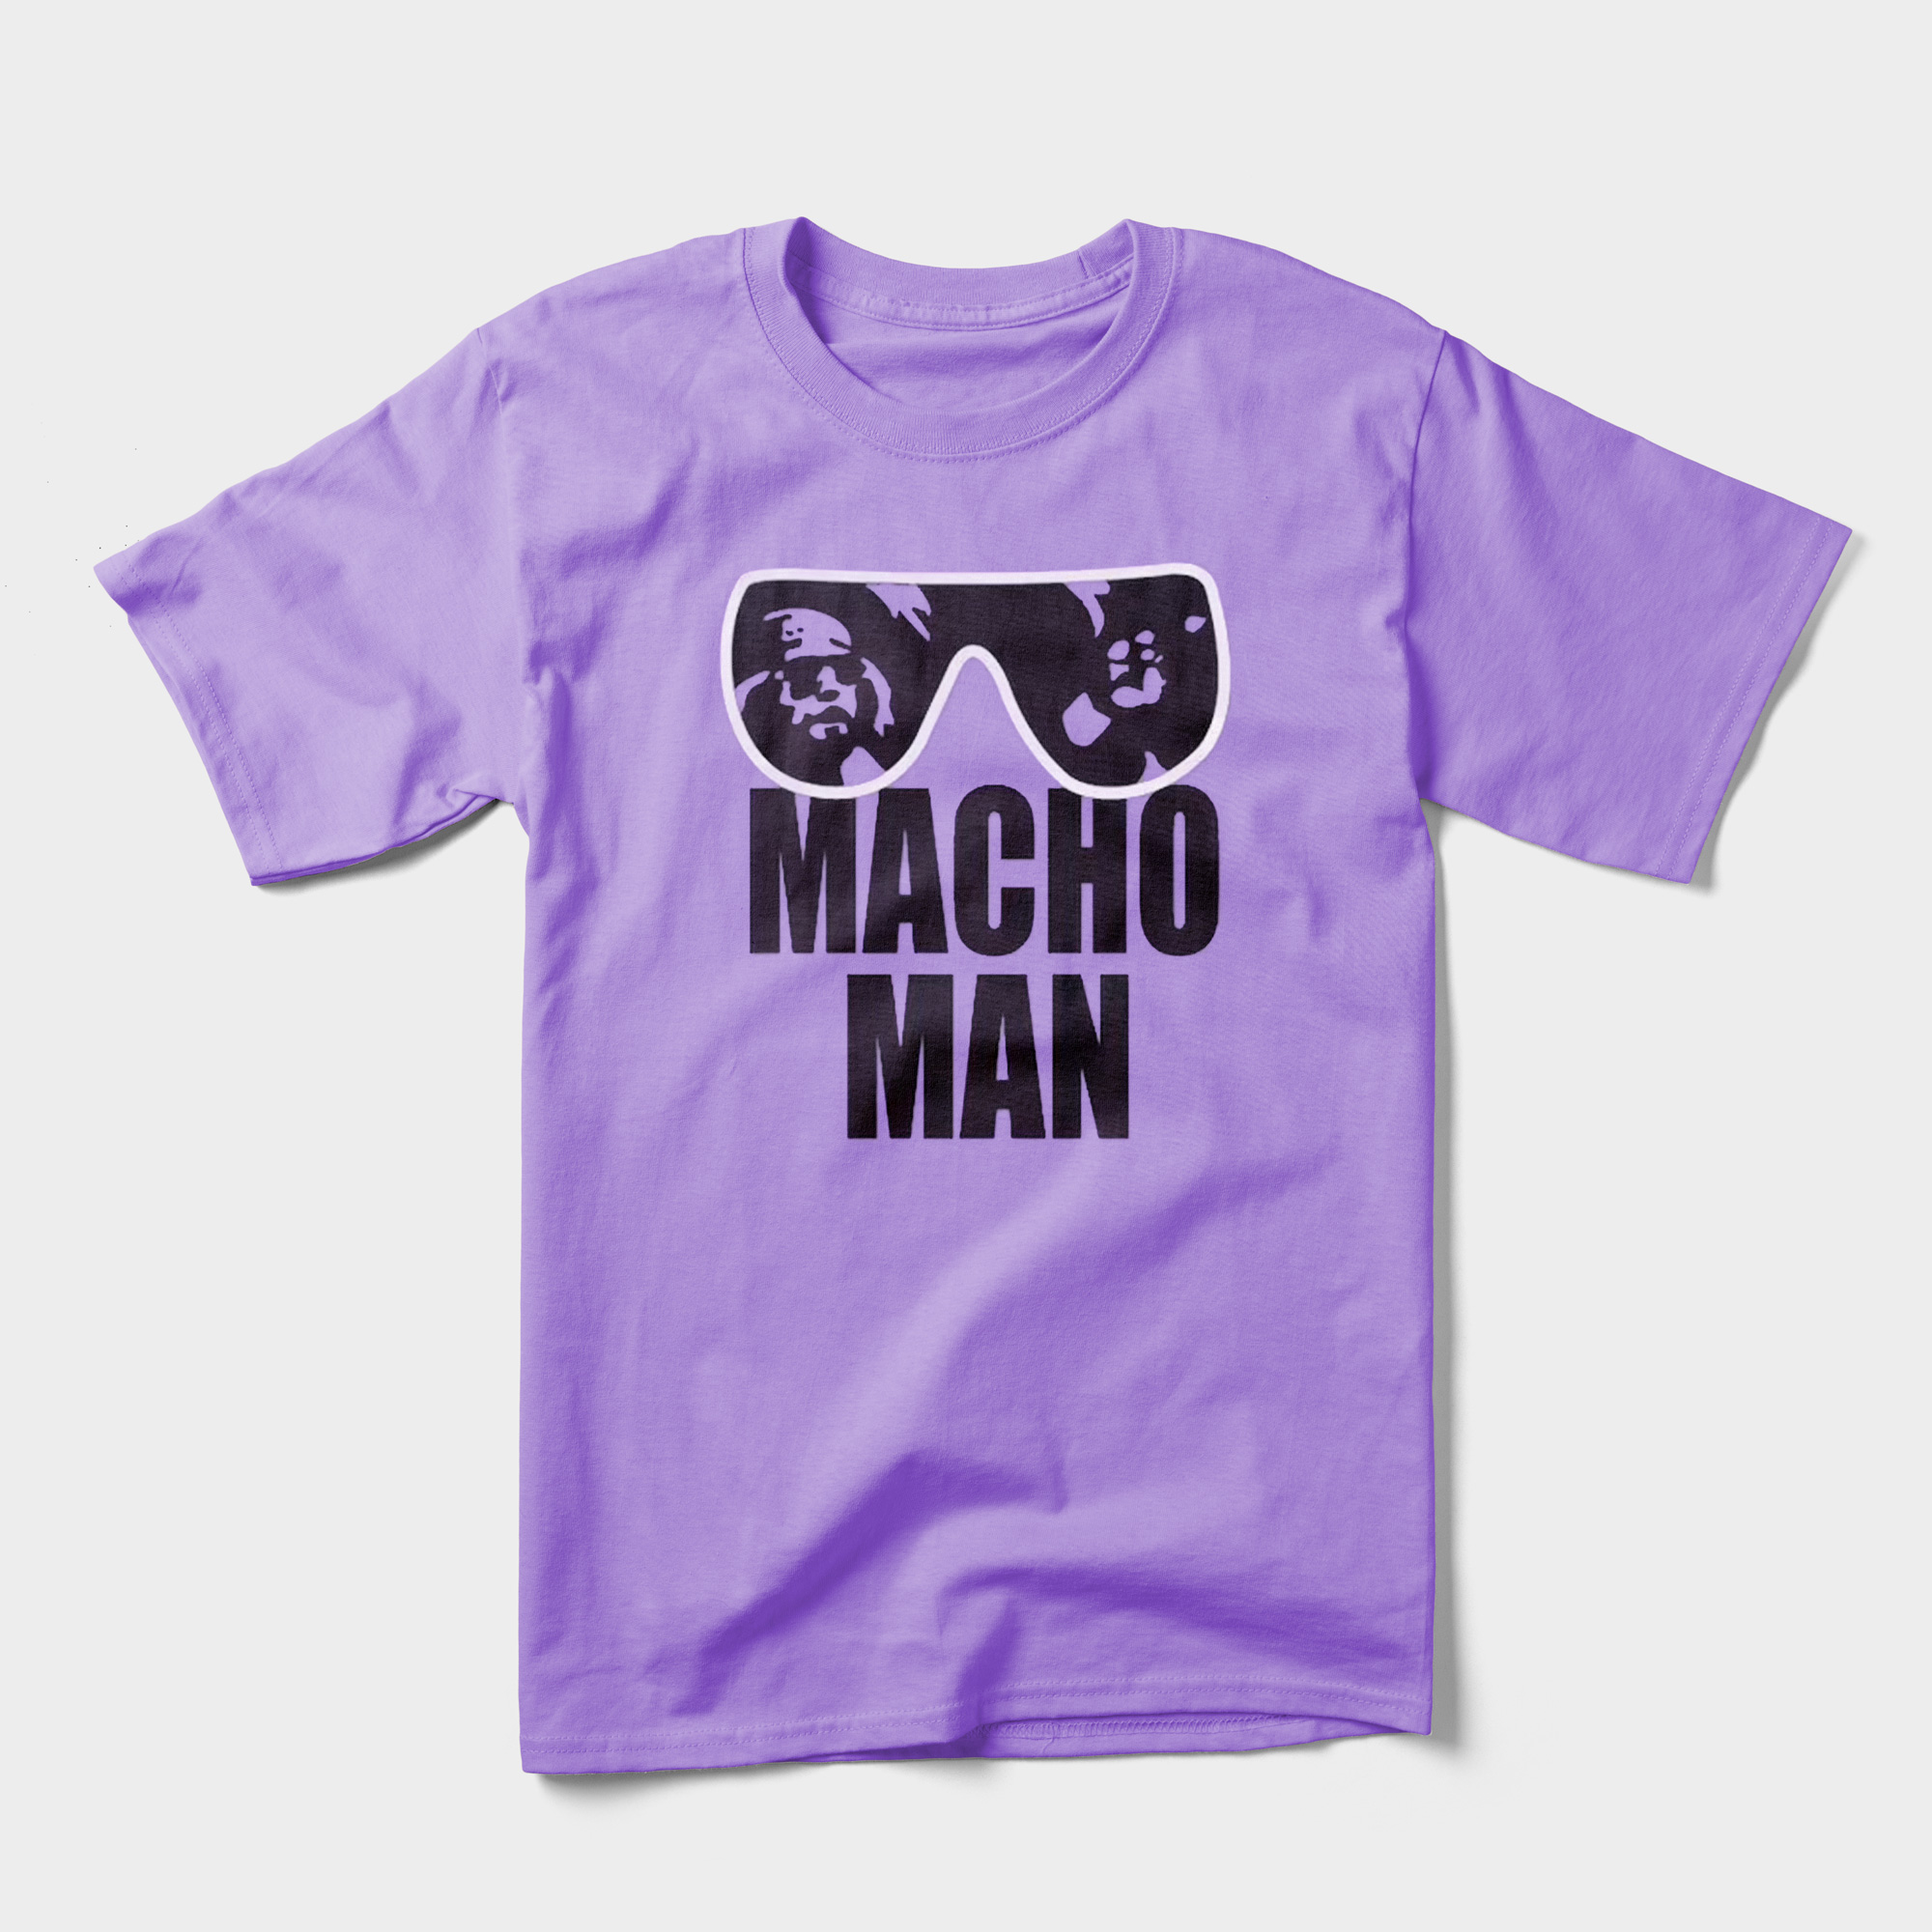 "Macho Man" Randy Savage's purple t-shirt need only the sunglasses and "Macho Man" for anyone to know who it's referencing. 